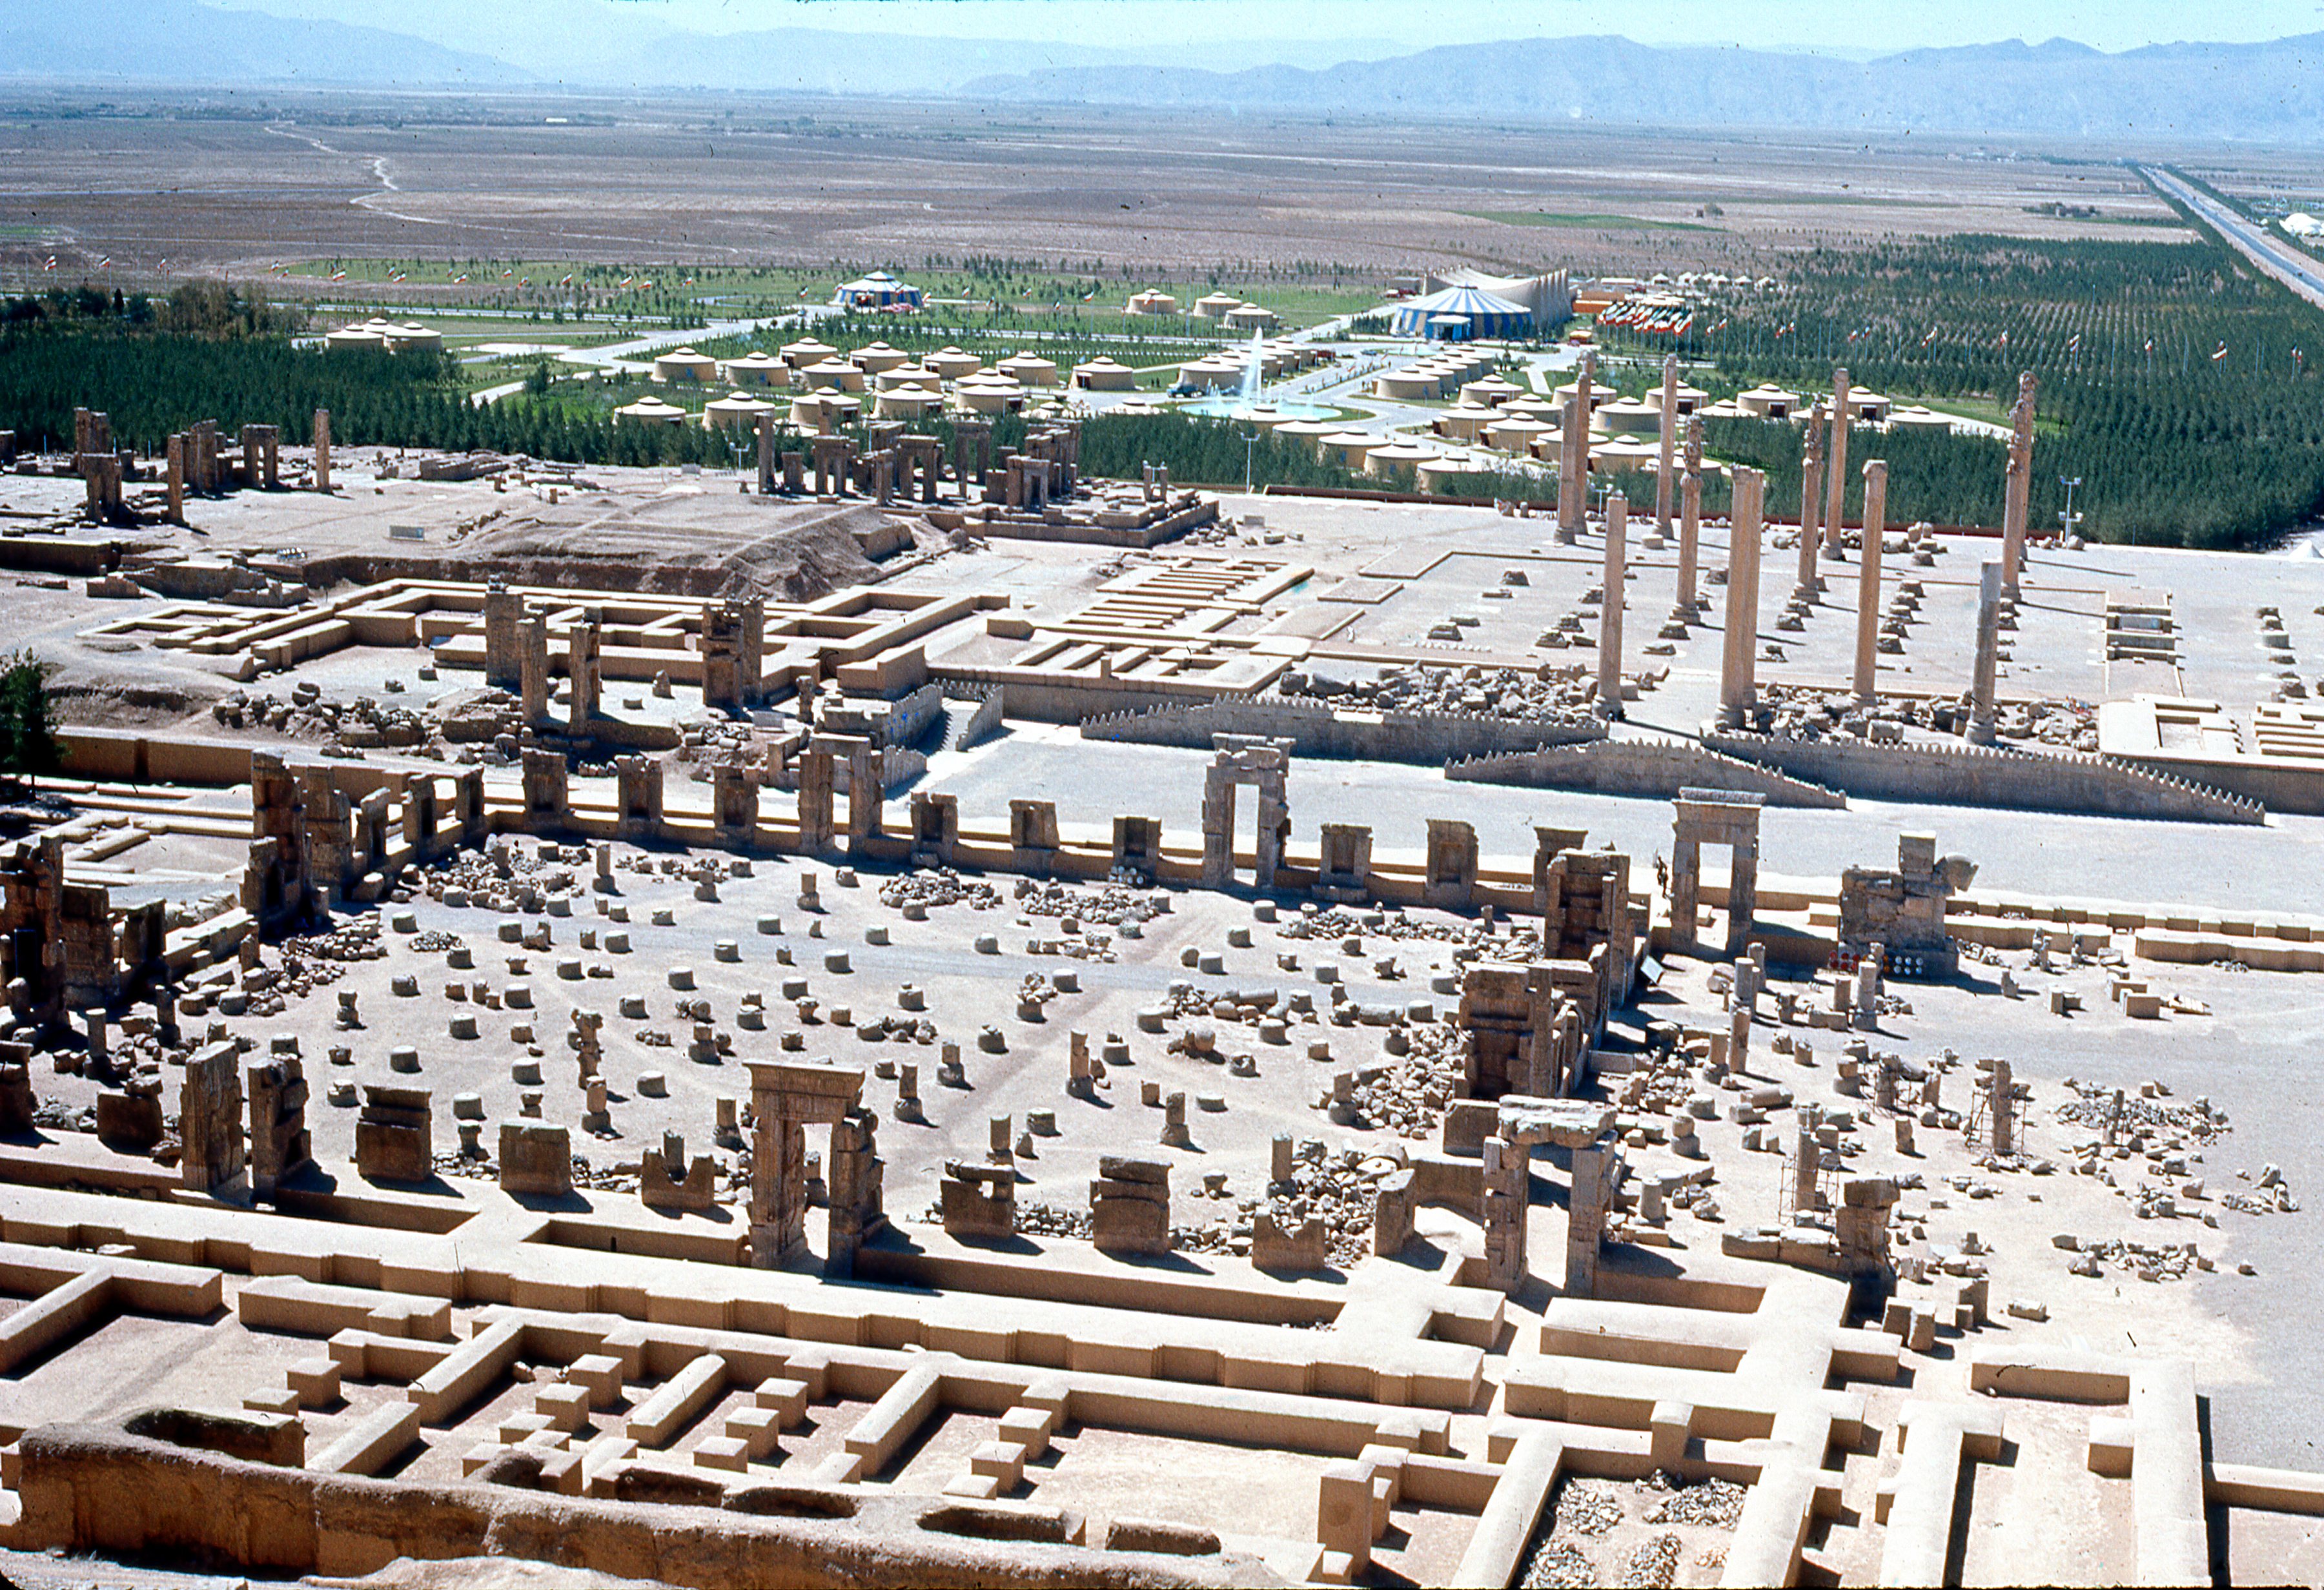 ancient site of Persepolis and tent city built for celebration of 2500th anniversary of founding of Iranian Empire in trent city erected in ruins of Persepolis and attended by foreign dignitaries in October 1971.